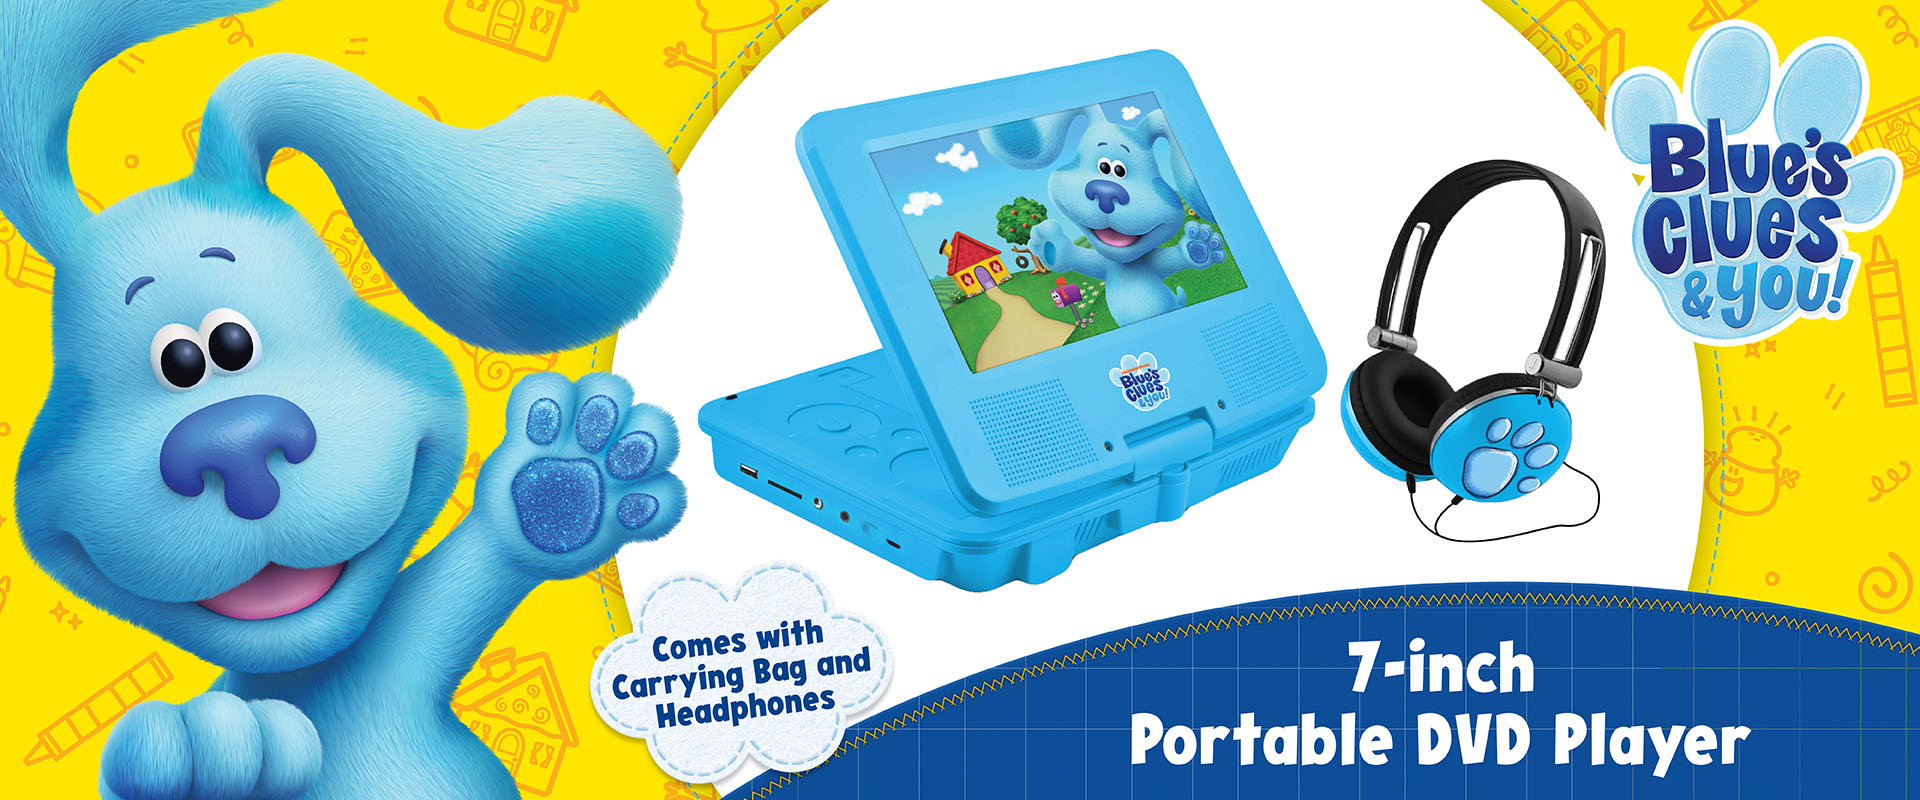 Featured Item 2: Blue's Clues & You! 7" Portable DVD Player